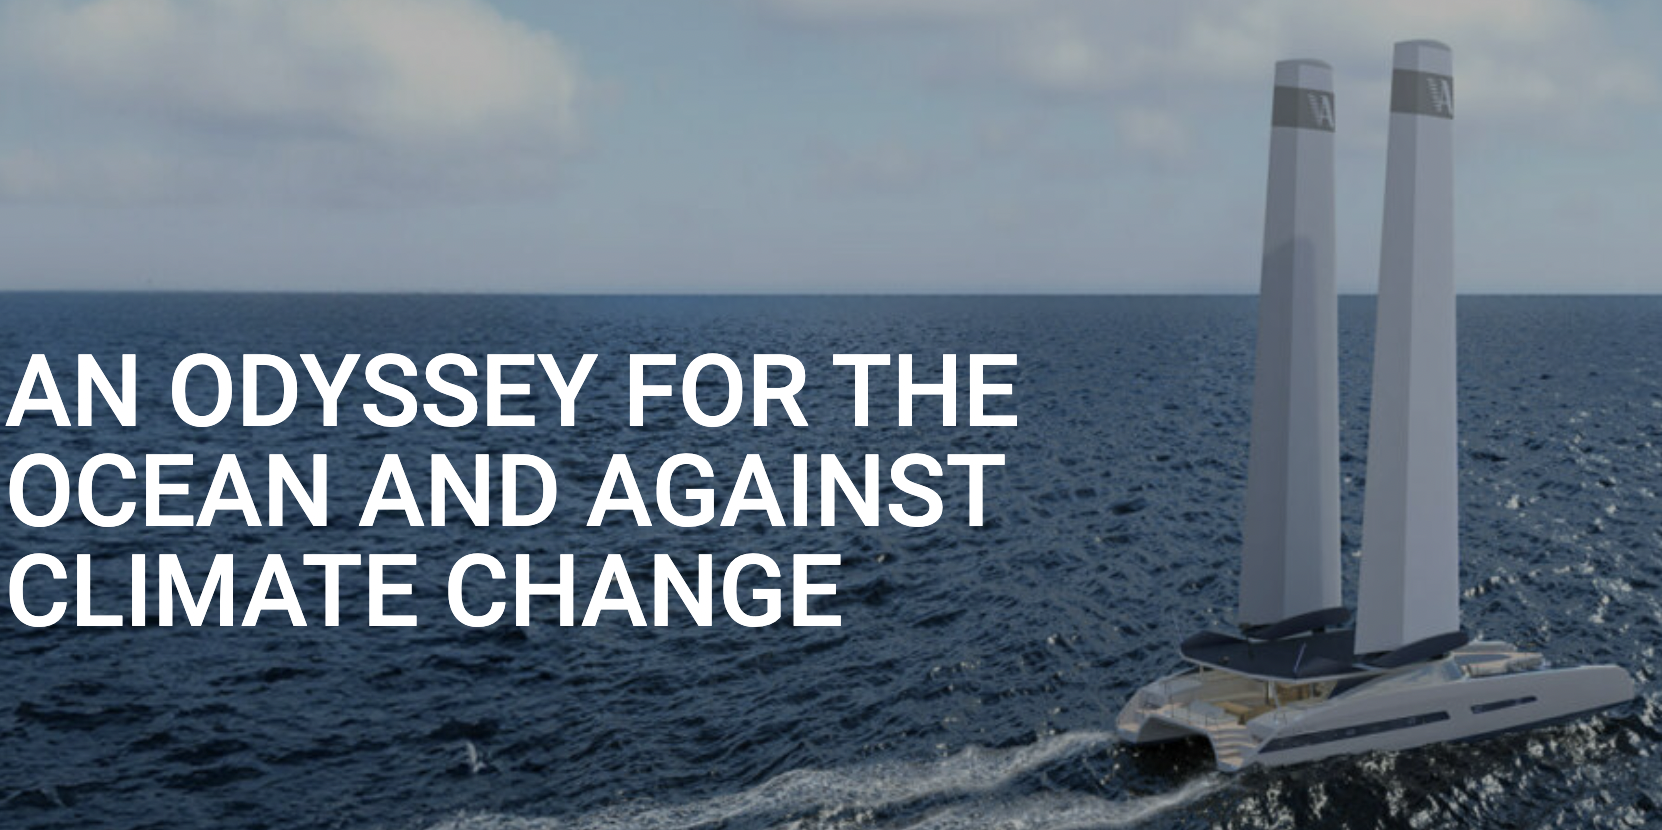 AN ODYSSEY FOR THE OCEAN AND AGAINST CLIMATE CHANGE